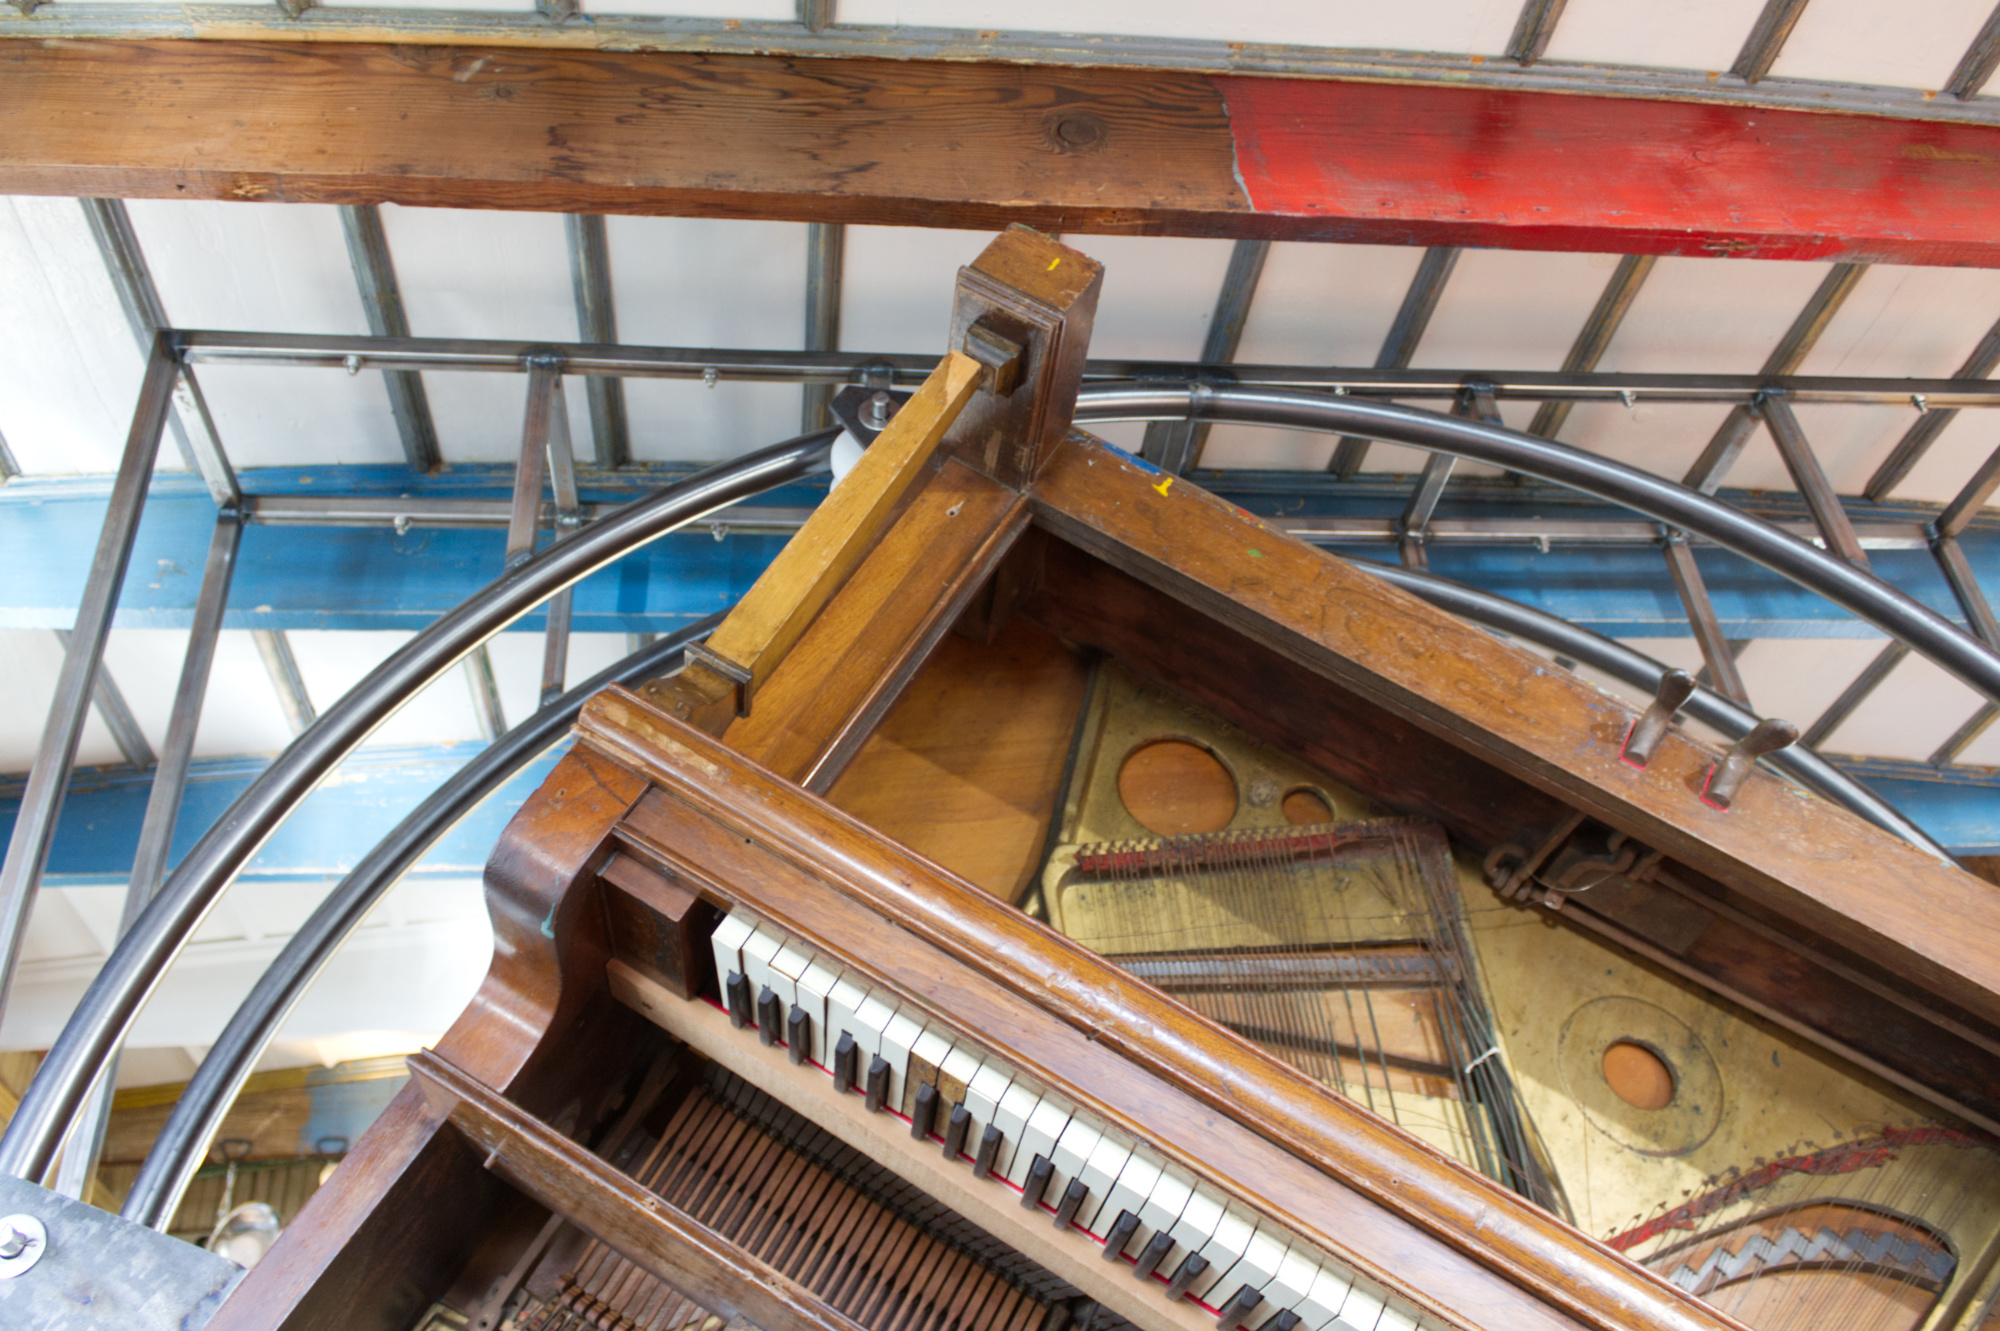 Detail of piano upside down inside its framework, against the ceiling of The Blue Cabin